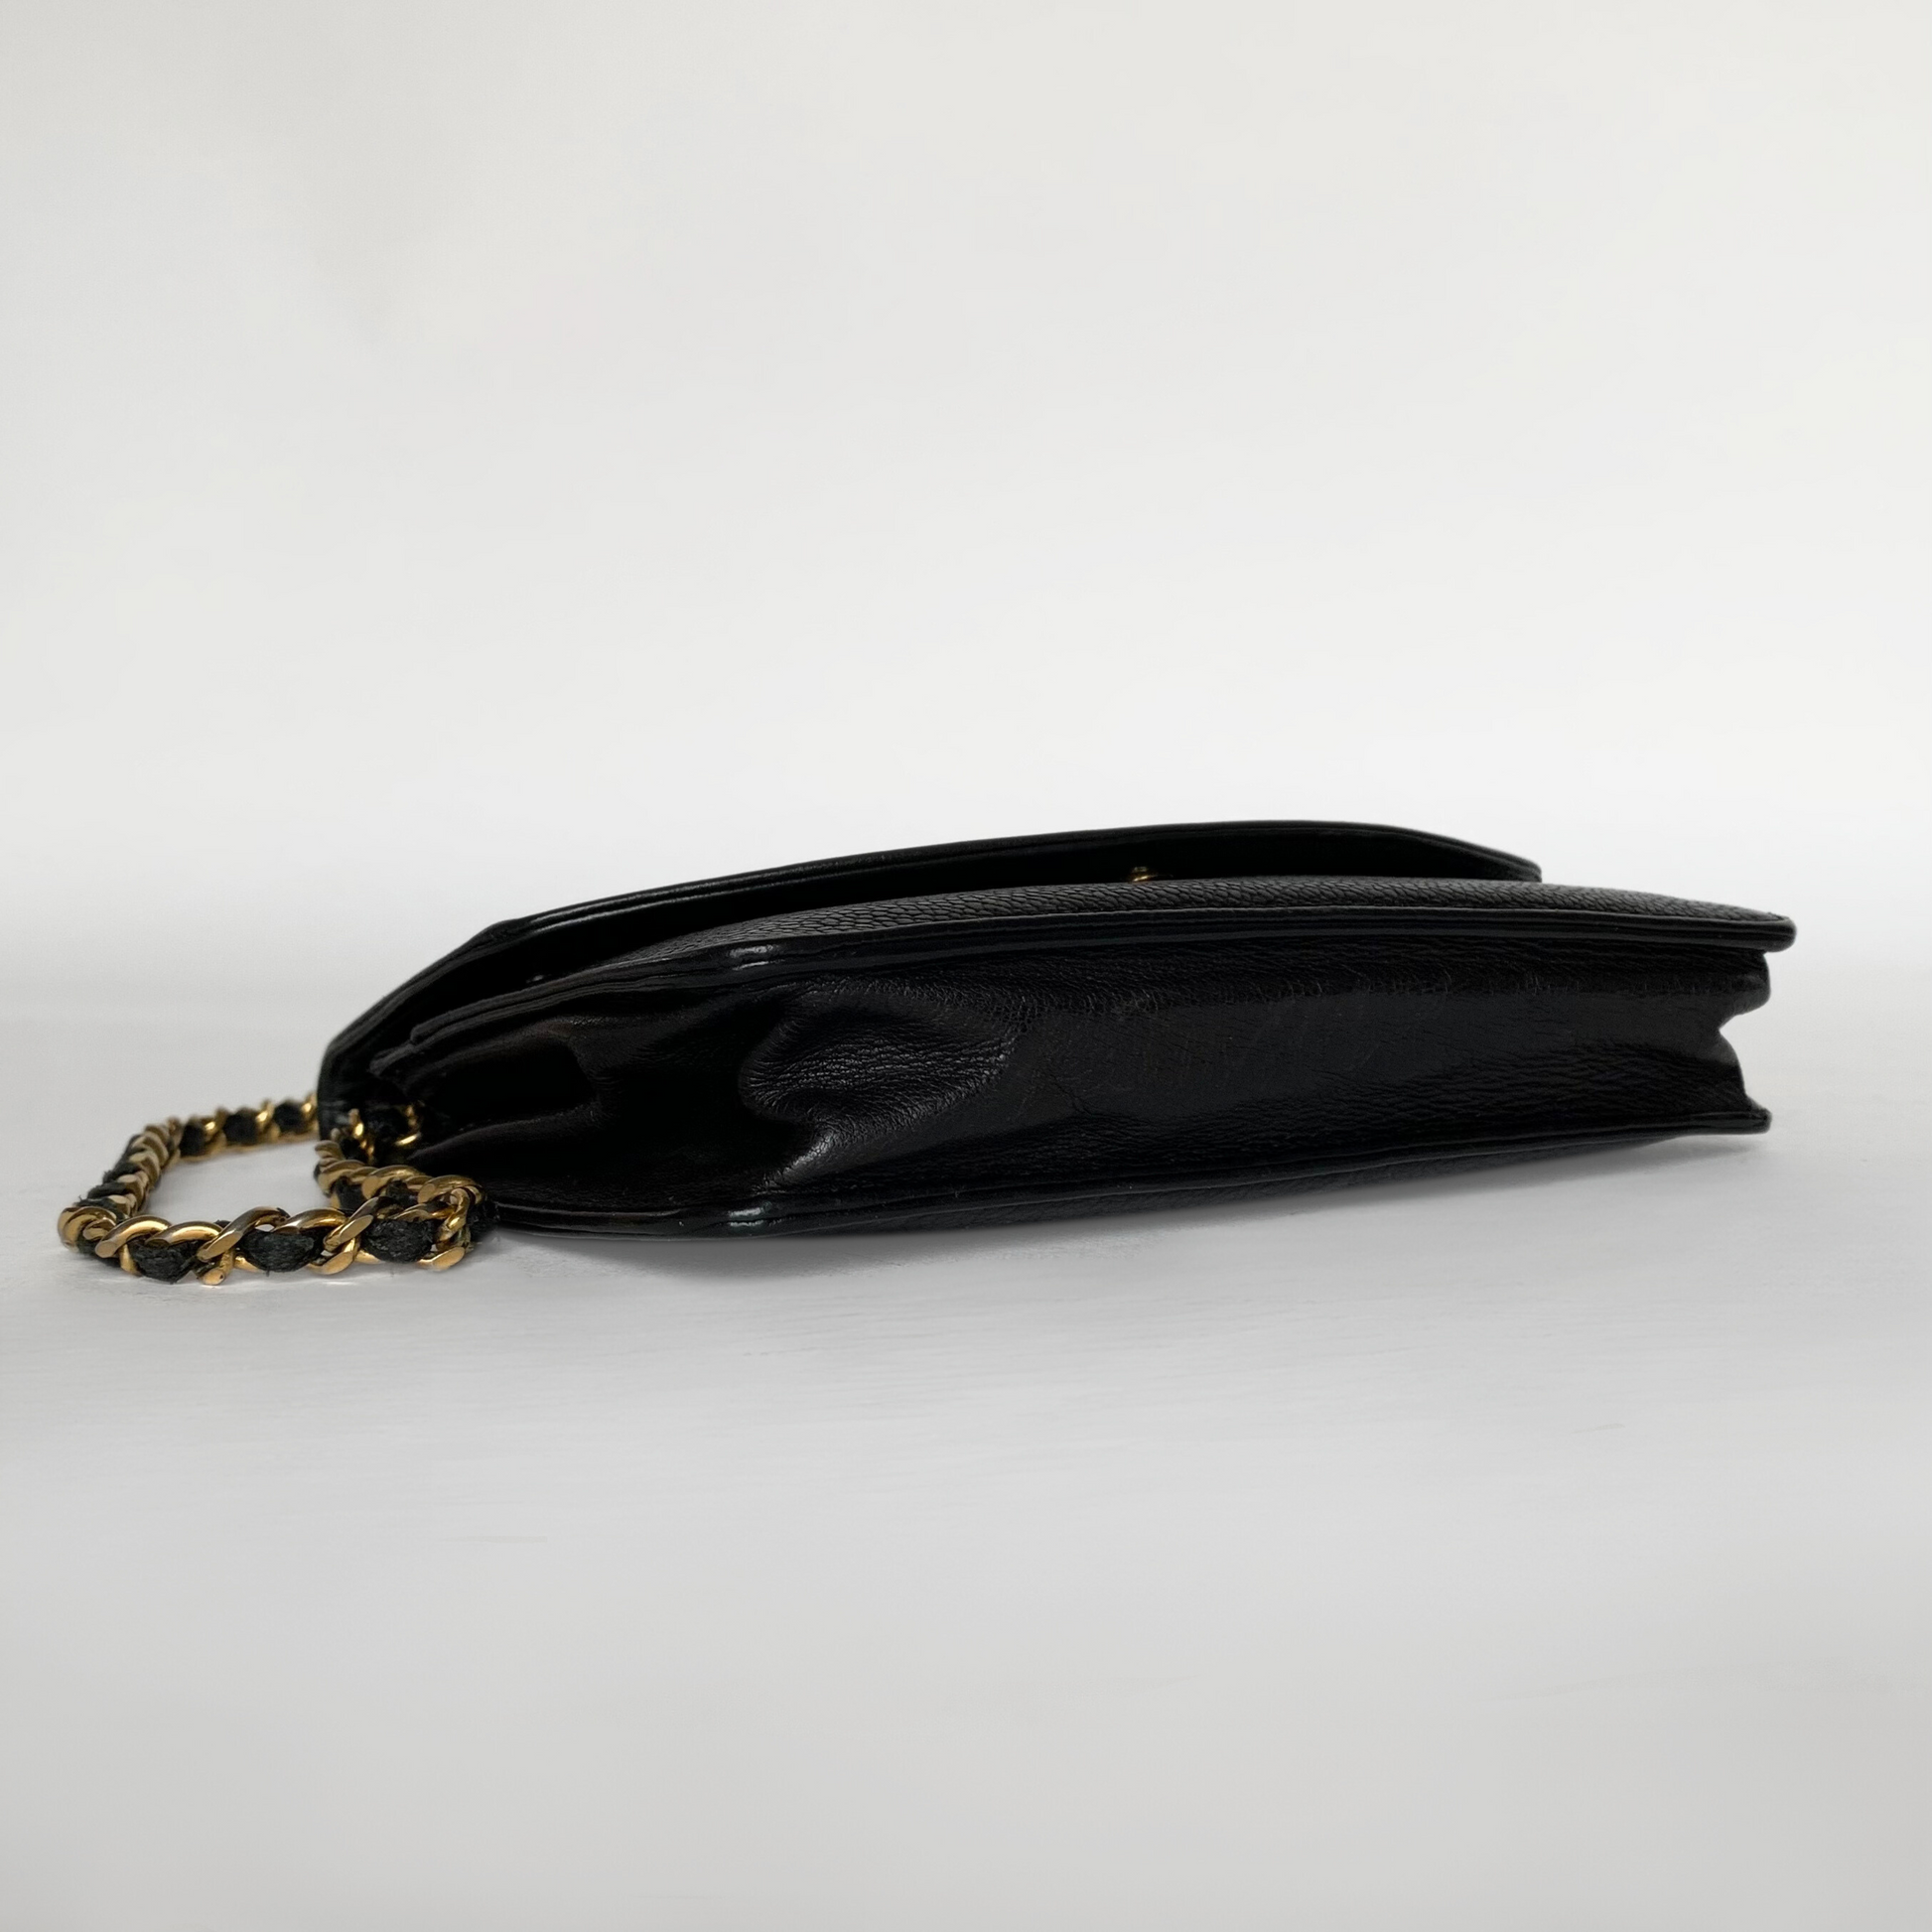 Chanel Chanel Wallet on a Chain Caviar Leather - Crossbody bags - Etoile Luxury Vintage